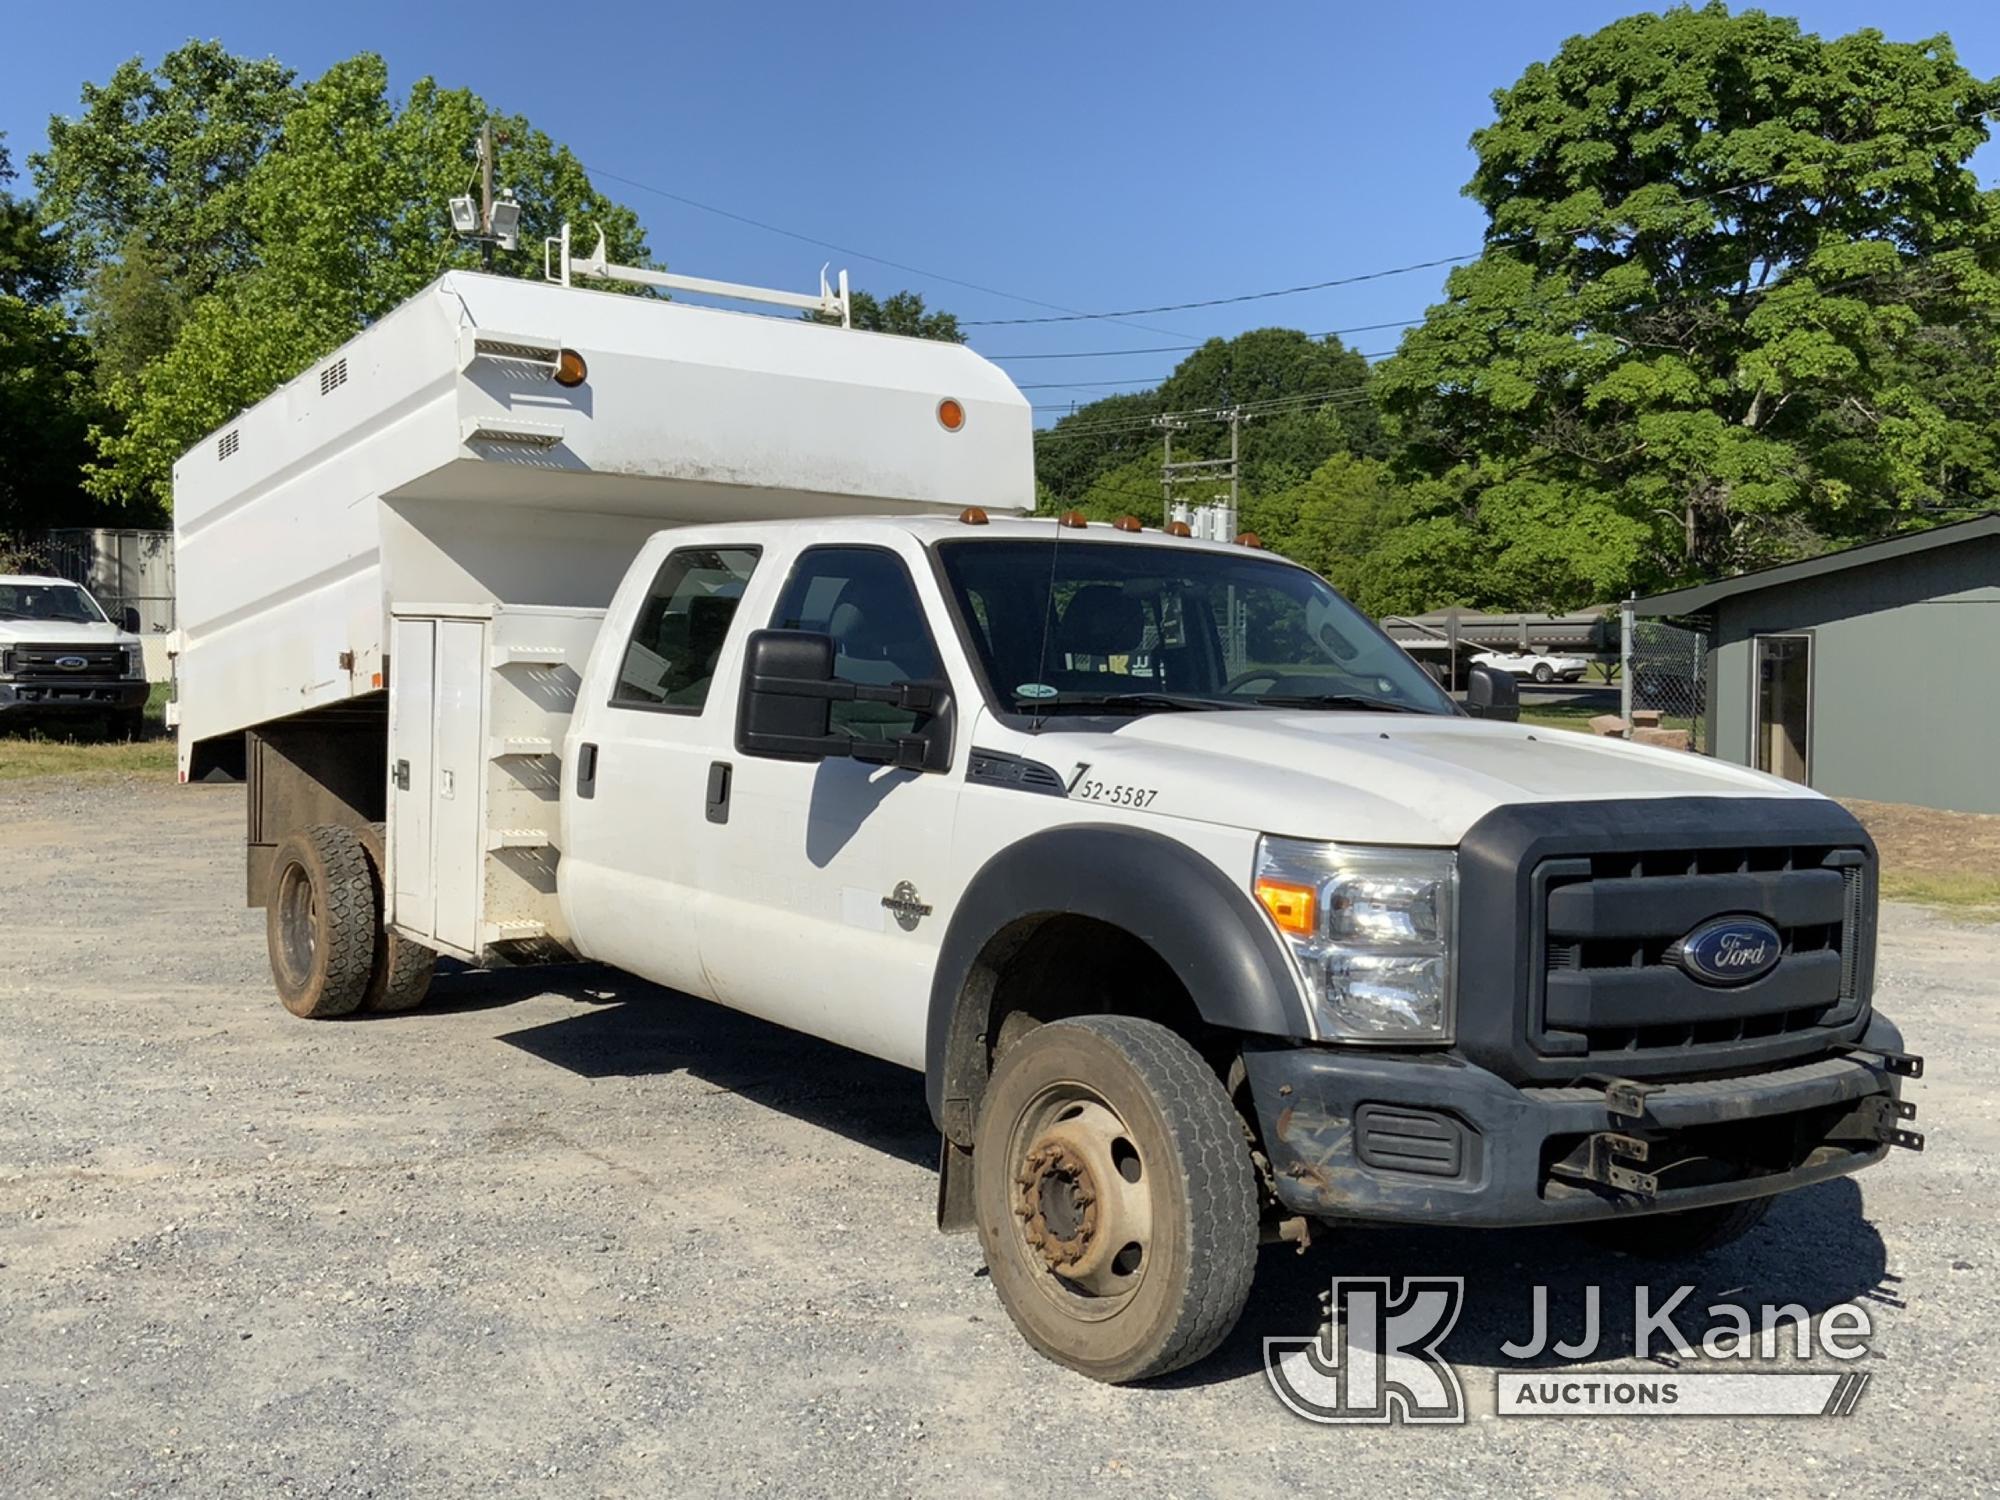 (Shelby, NC) 2015 Ford F550 4x4 Crew-Cab Chipper Dump Truck Runs, Moves & Dump Bed Operates) (Check